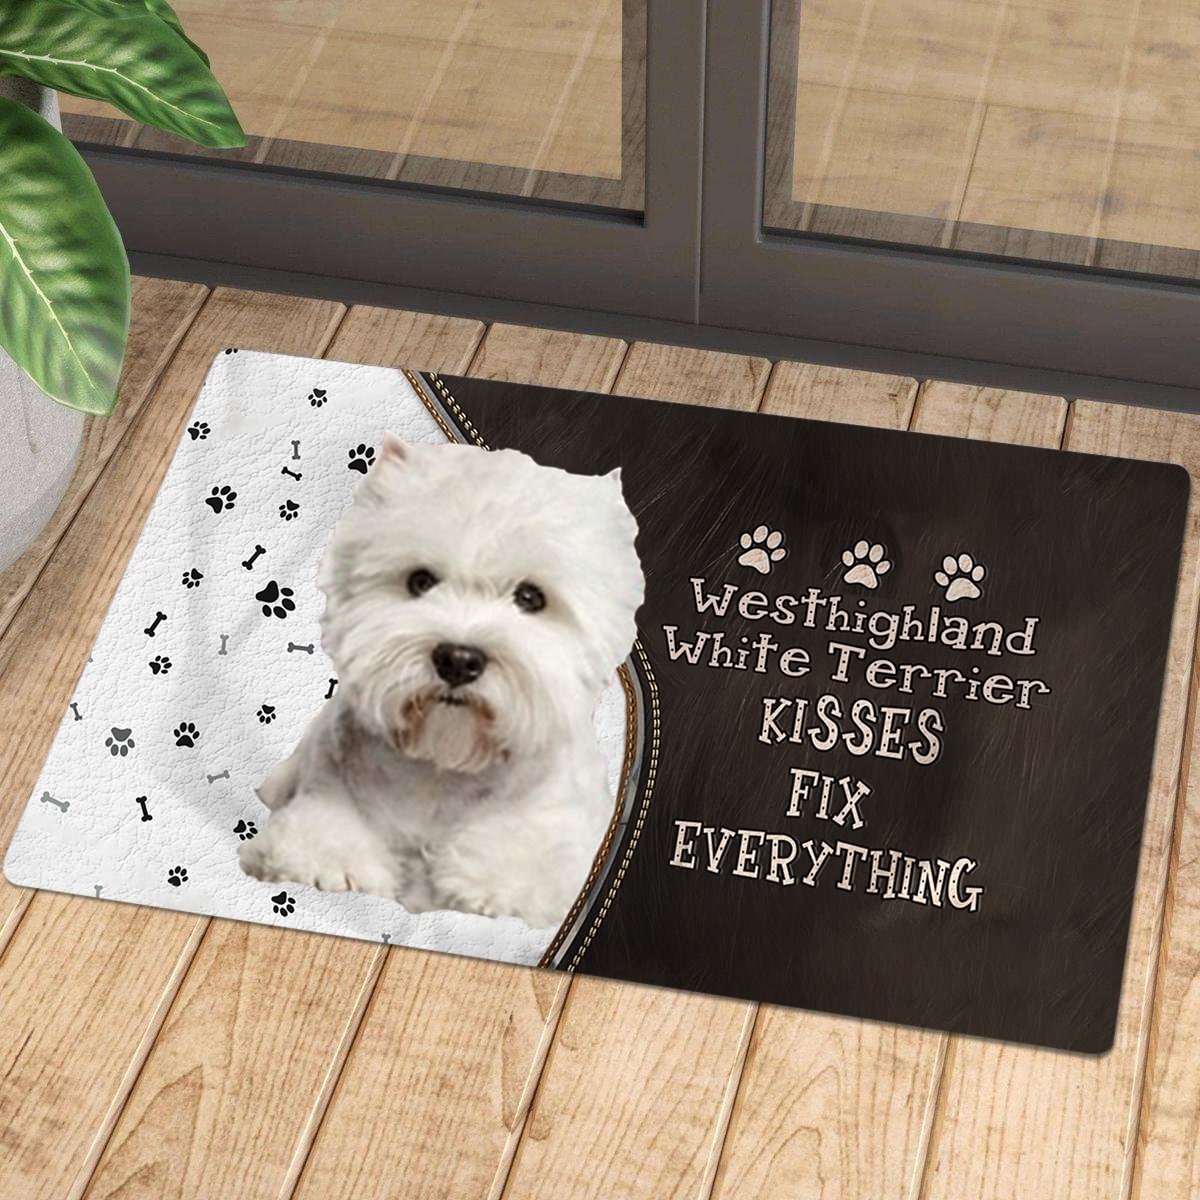 Westhighland-White-Terrier Kisses Fix Everything Doormat